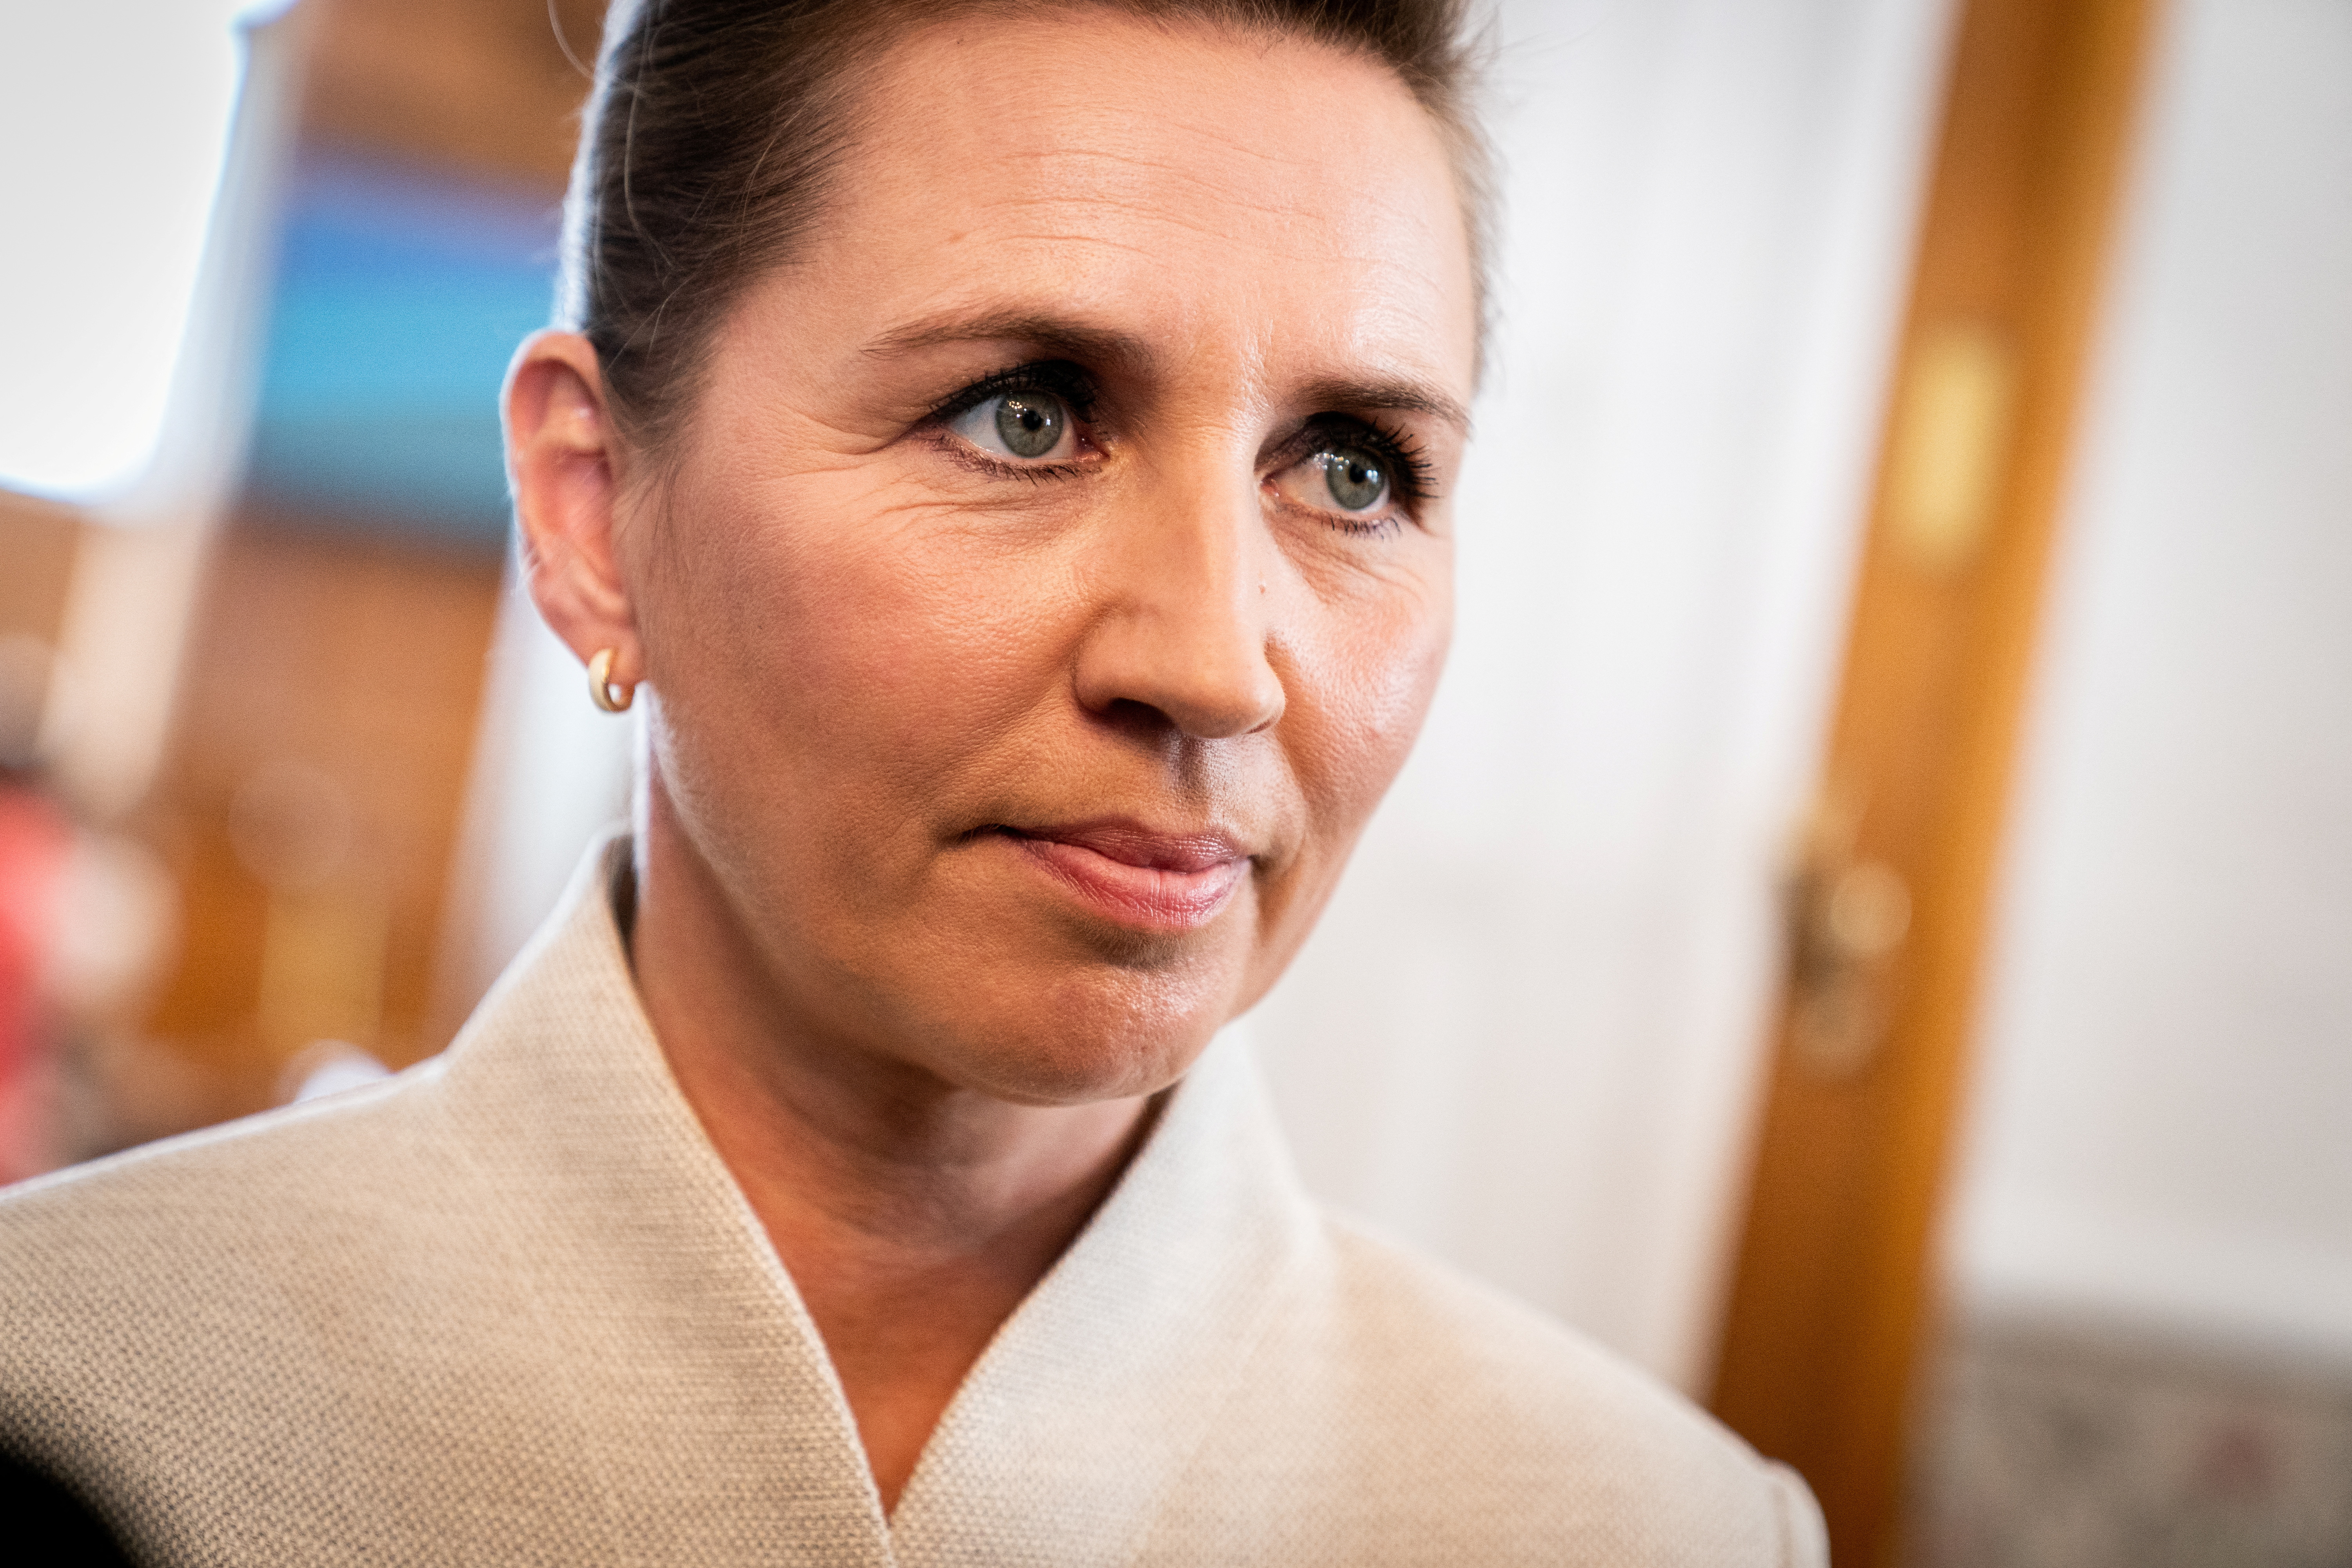 Prime Minister Mette Frederiksen speaks to the press after her opening speech at the opening of Folketing at Christiansborg Castle, Copenhagen